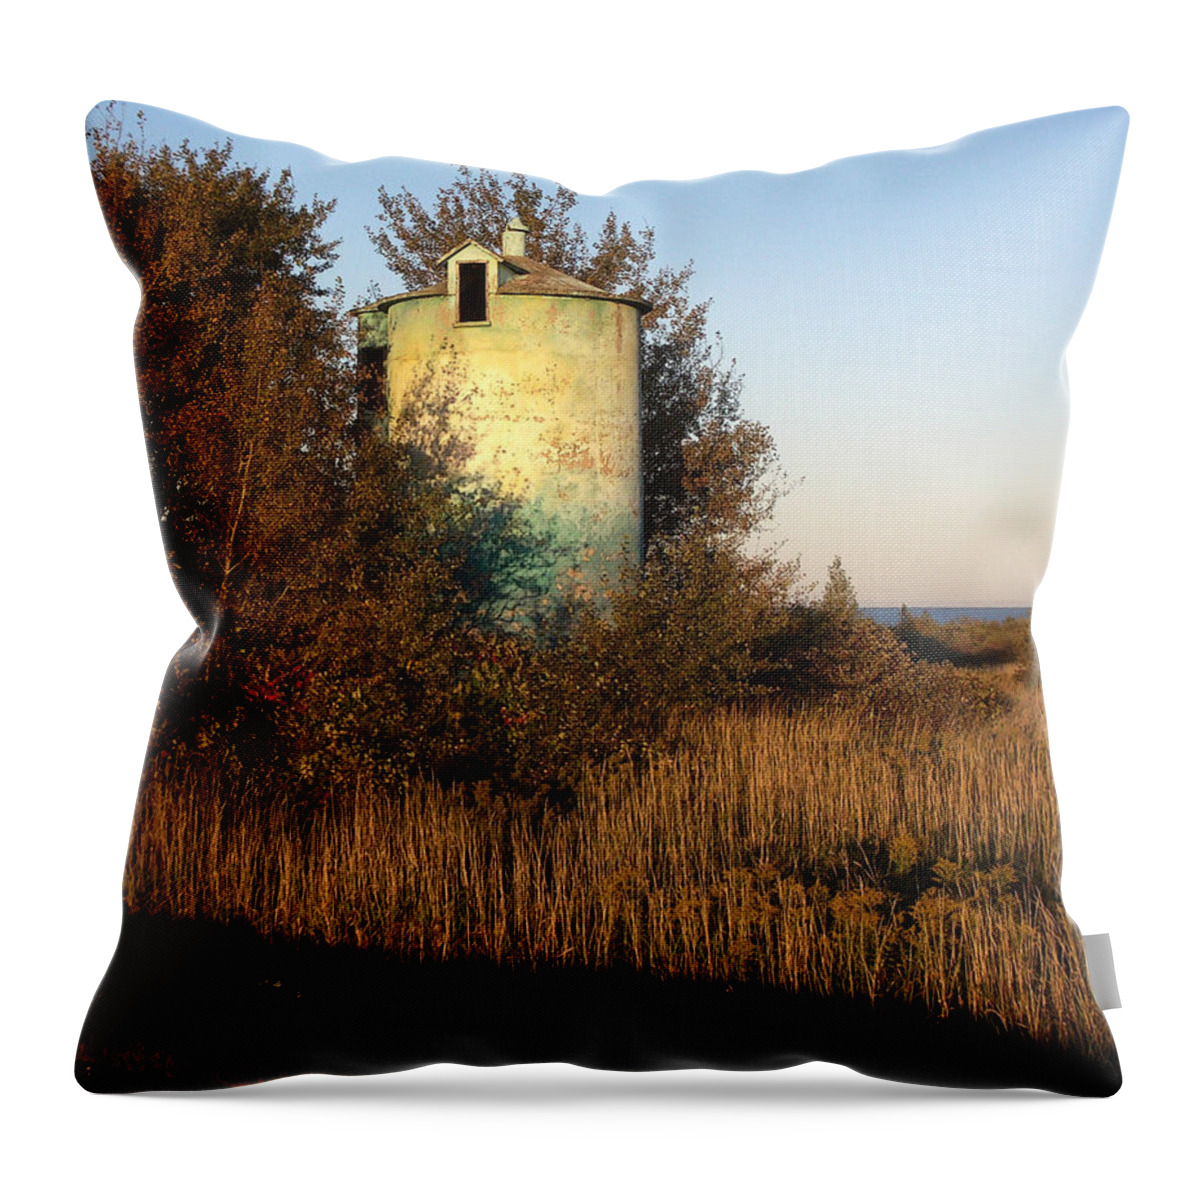 Silo Throw Pillow featuring the photograph Aqua Silo by Tim Nyberg